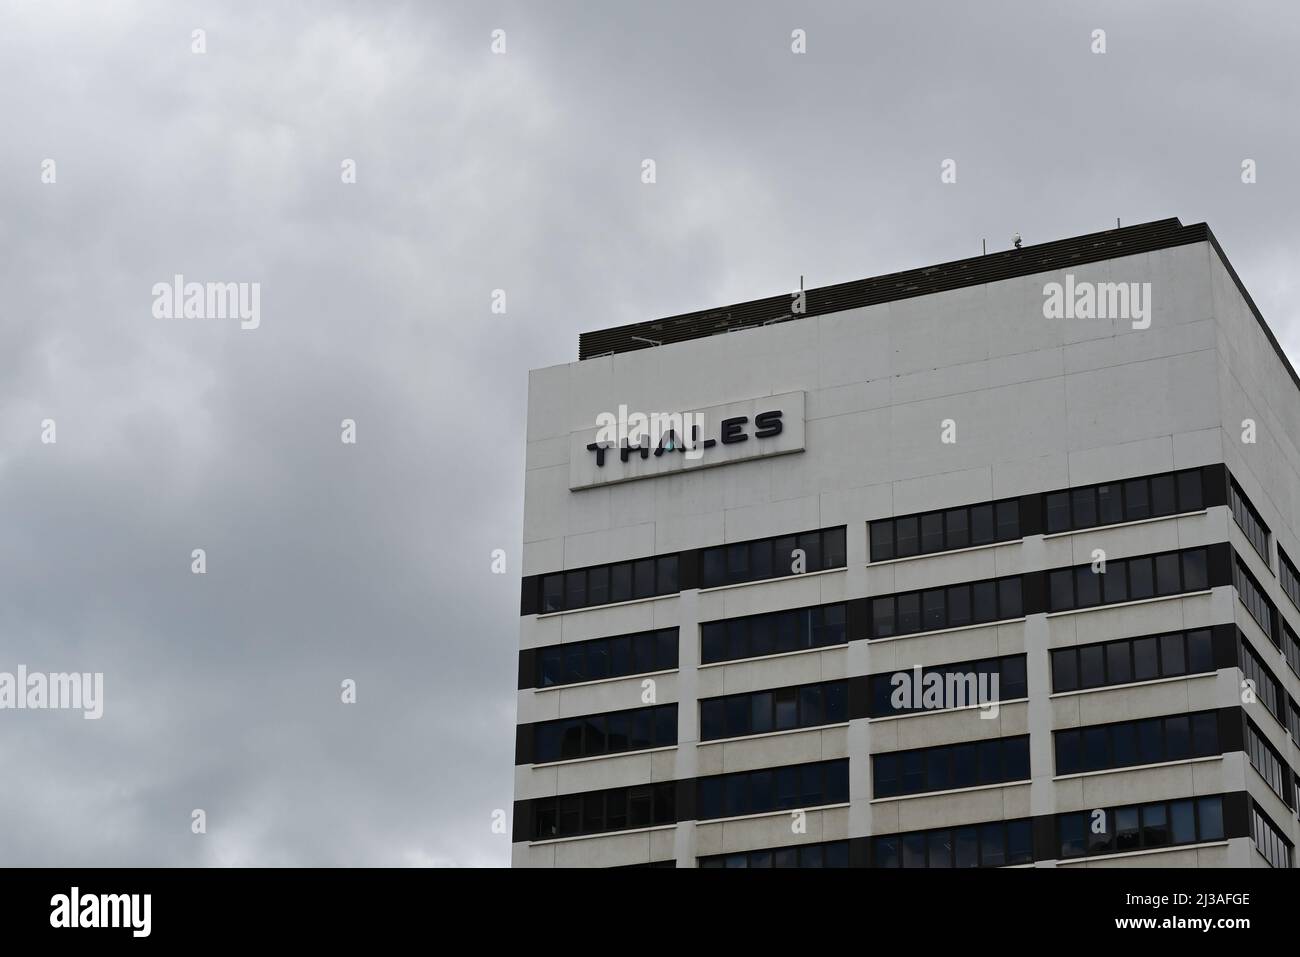 Grimy Thales logo on a white skyscraper, during a cloudy day Stock Photo